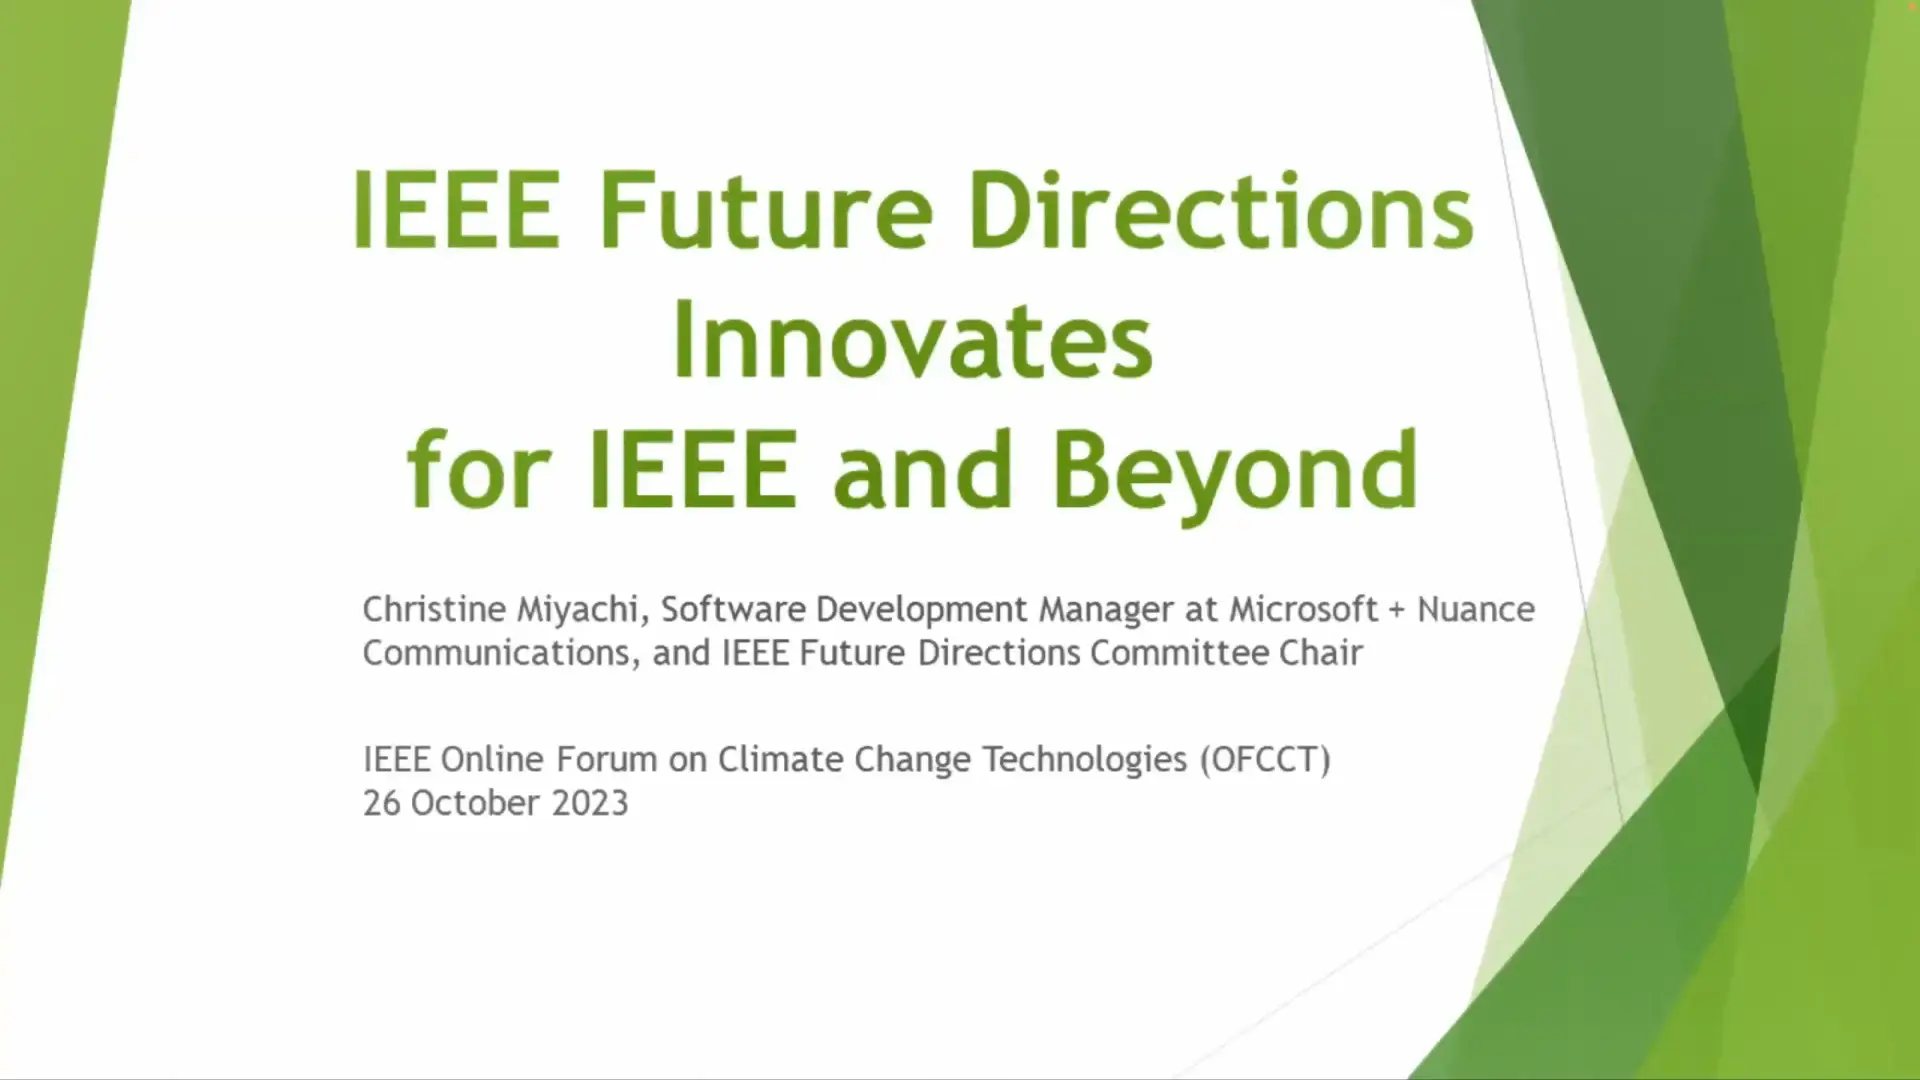 IEEE OFCCT 2023: Keynote 4.1: IEEE Future Directions Innovates for IEEE and Beyond